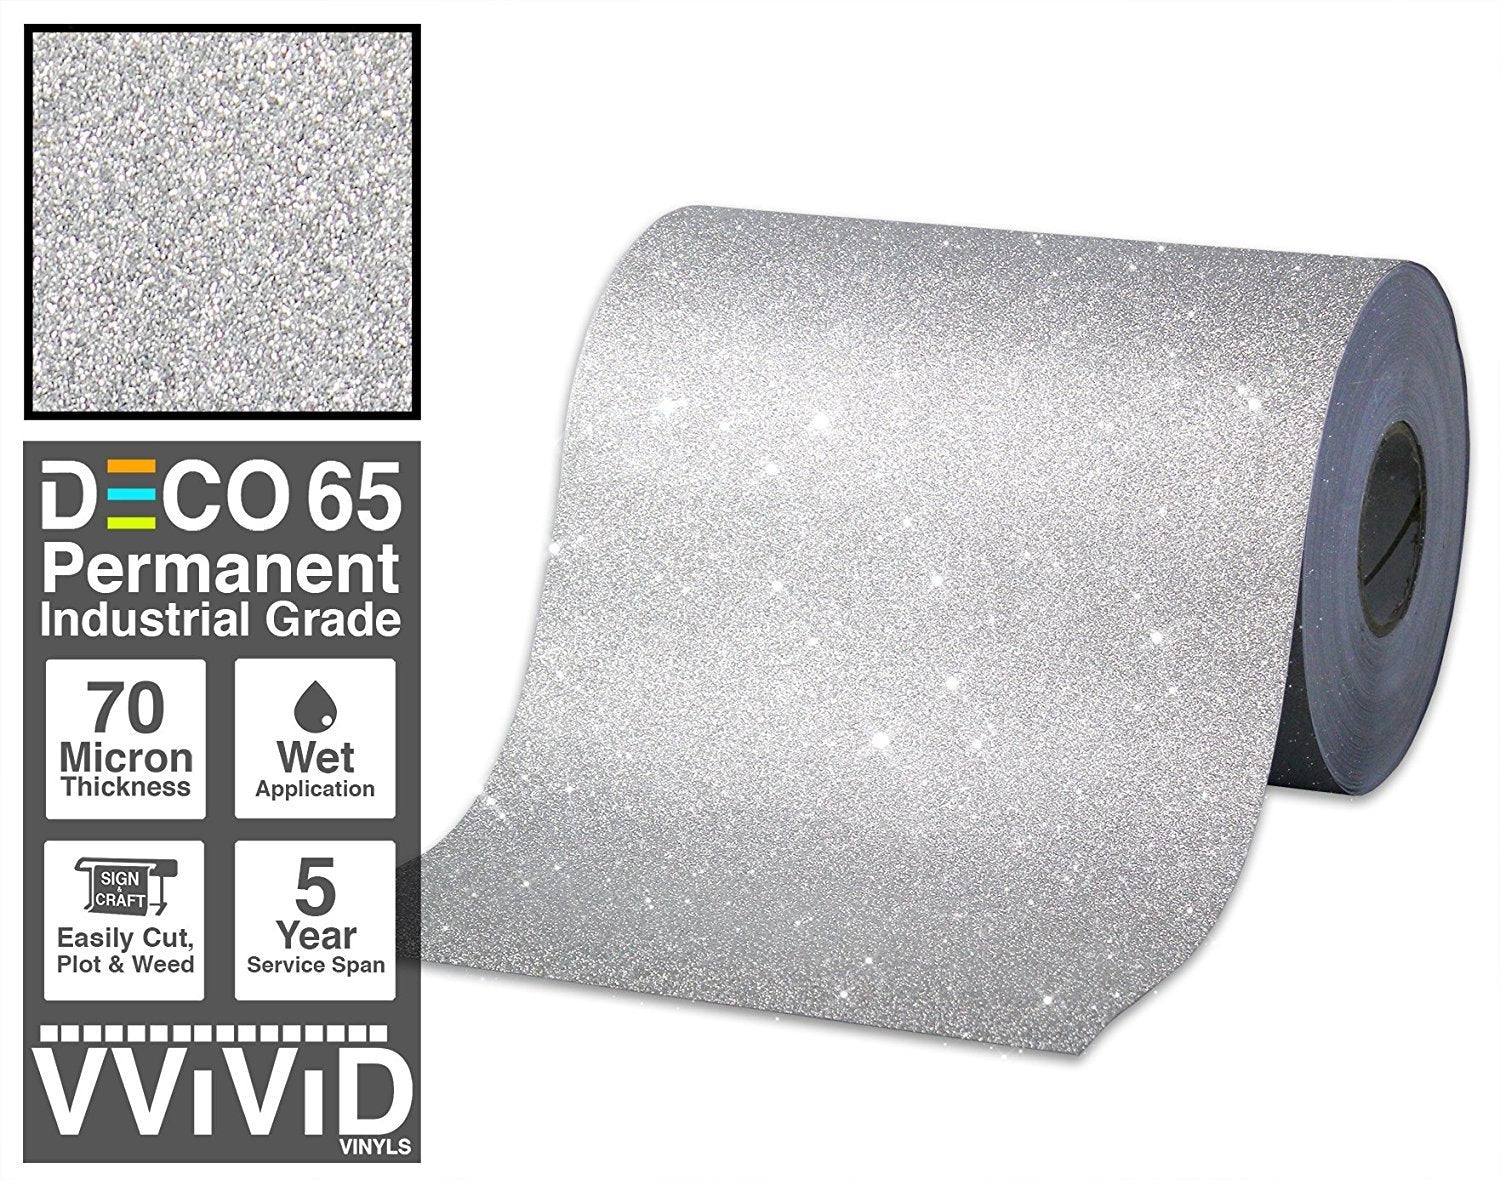 VViViD DECO65 Reflective Permanent Adhesive Craft Vinyl Roll for Cricut, Silhouette & Cameo (Silver, 12 x 15ft)